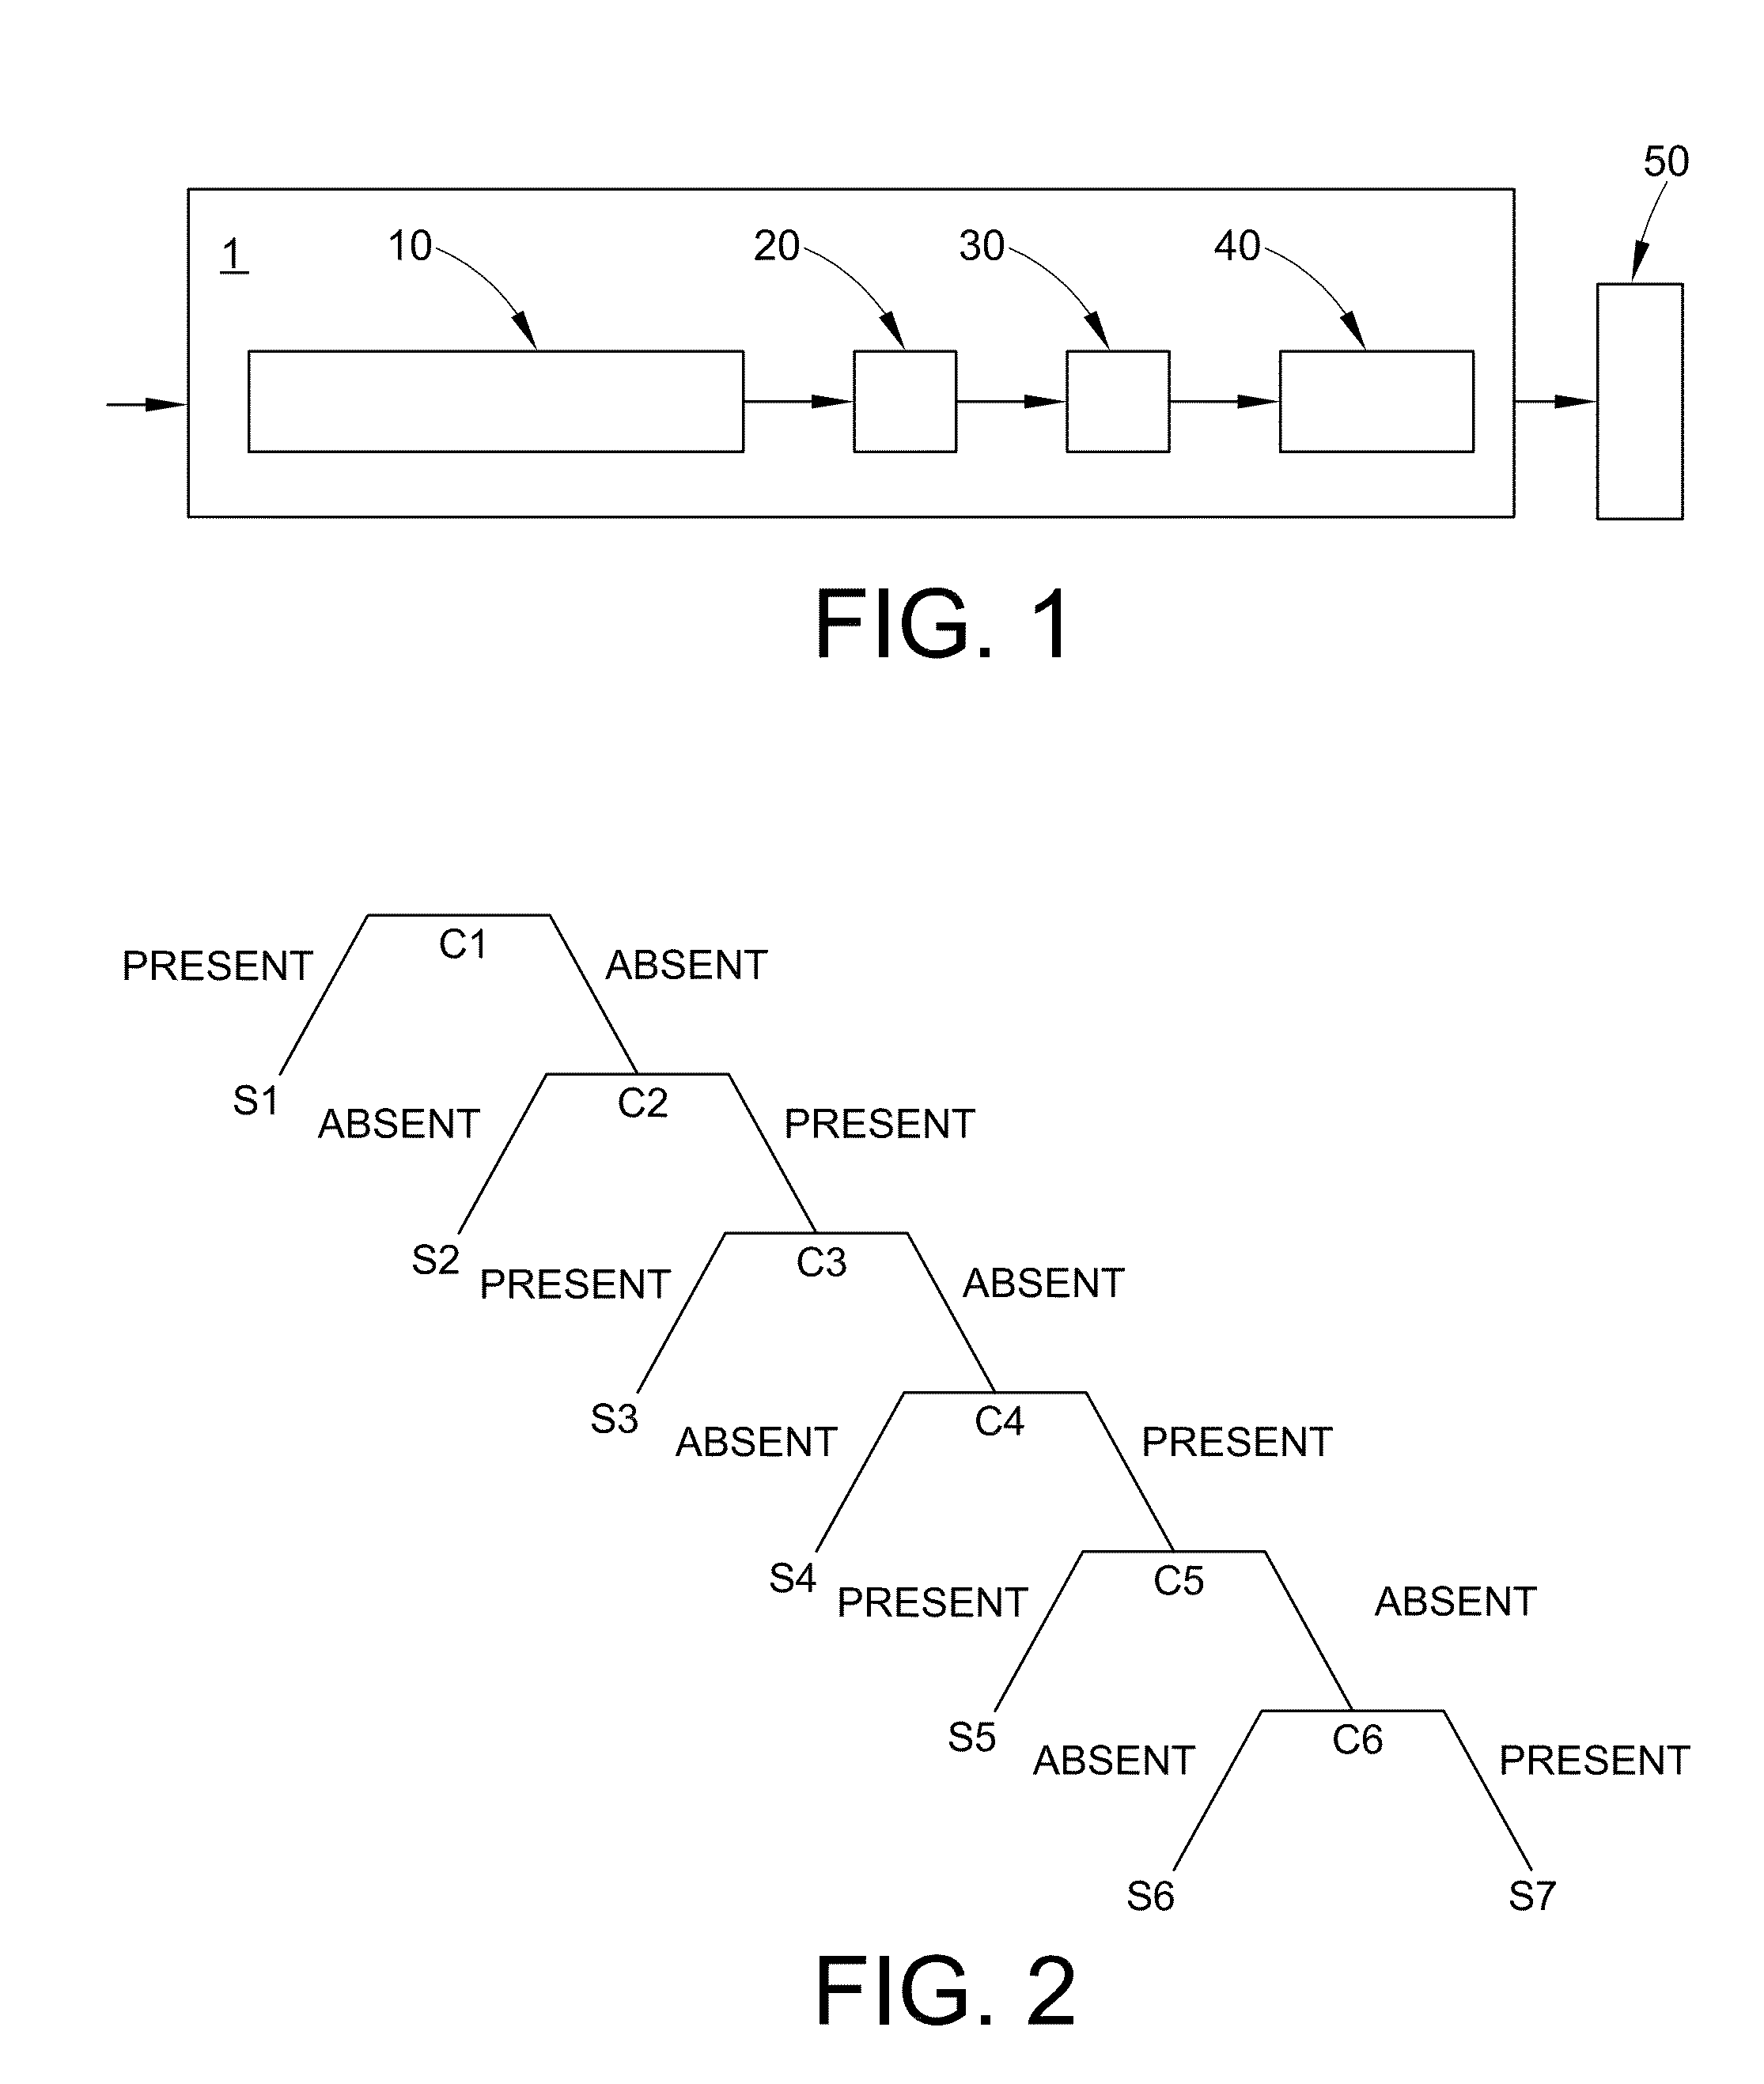 Methods of source attribution for chemical compounds